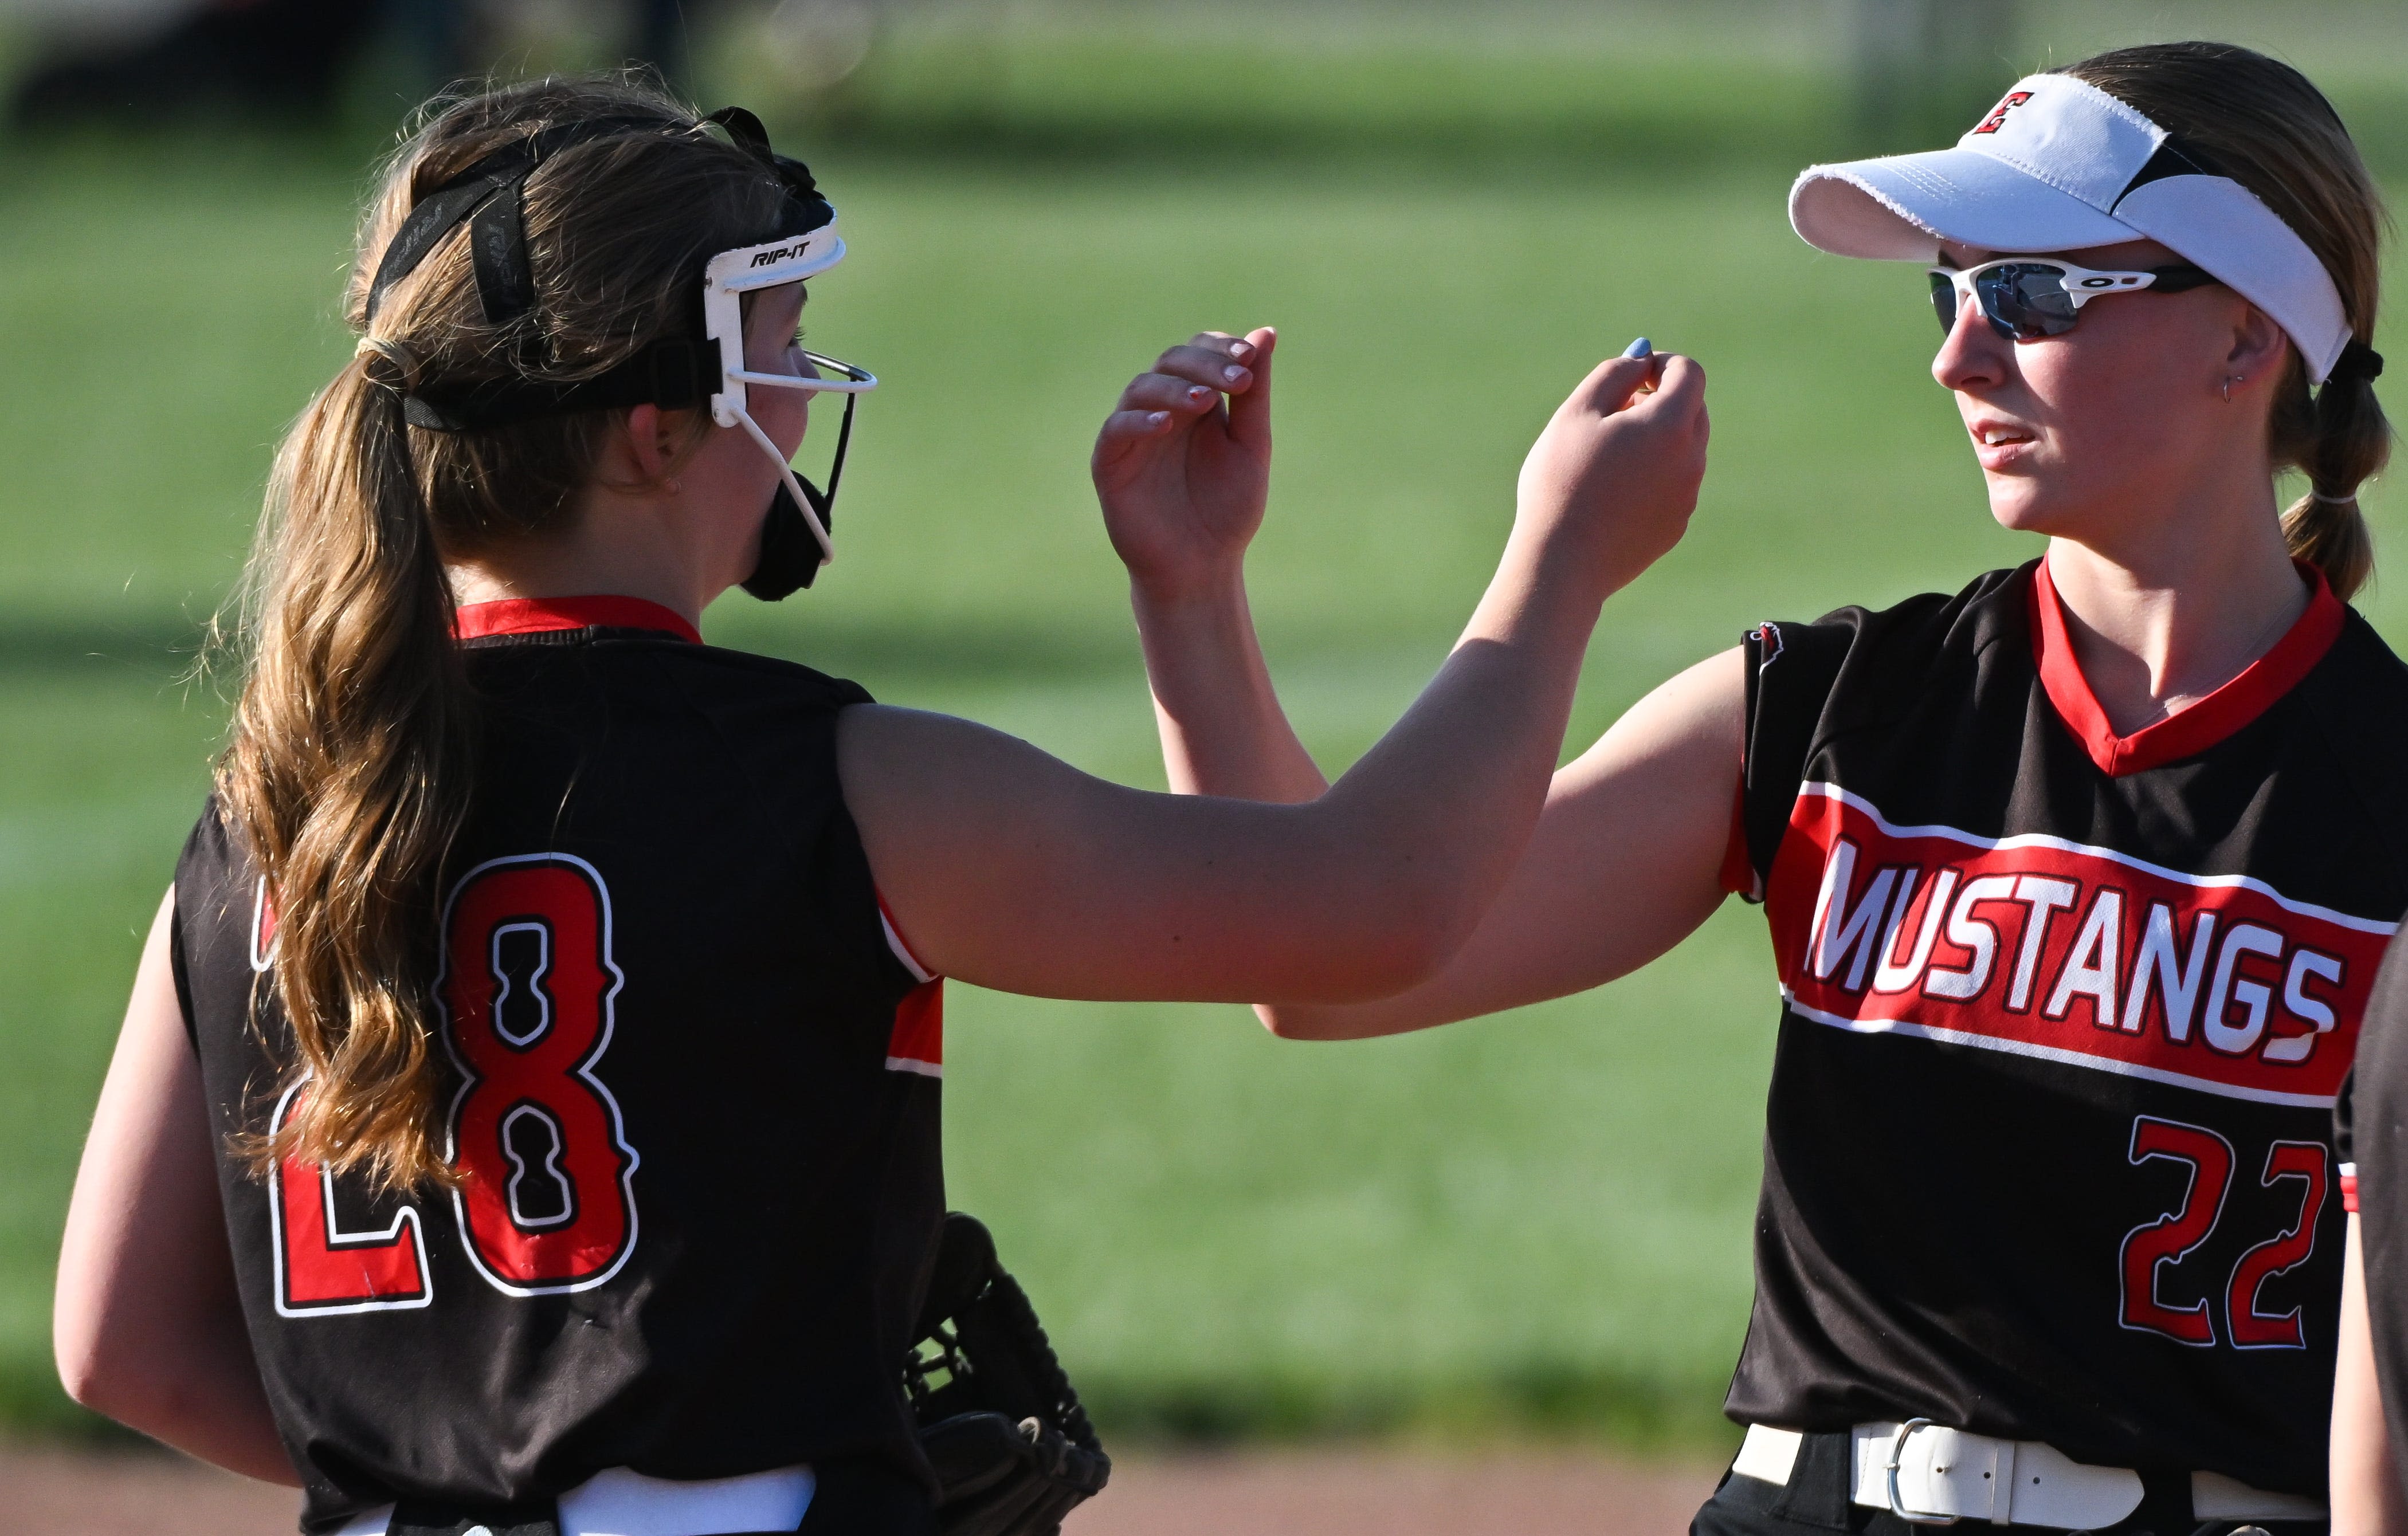 Softball: Stephens sisters share special season together with Edgewood